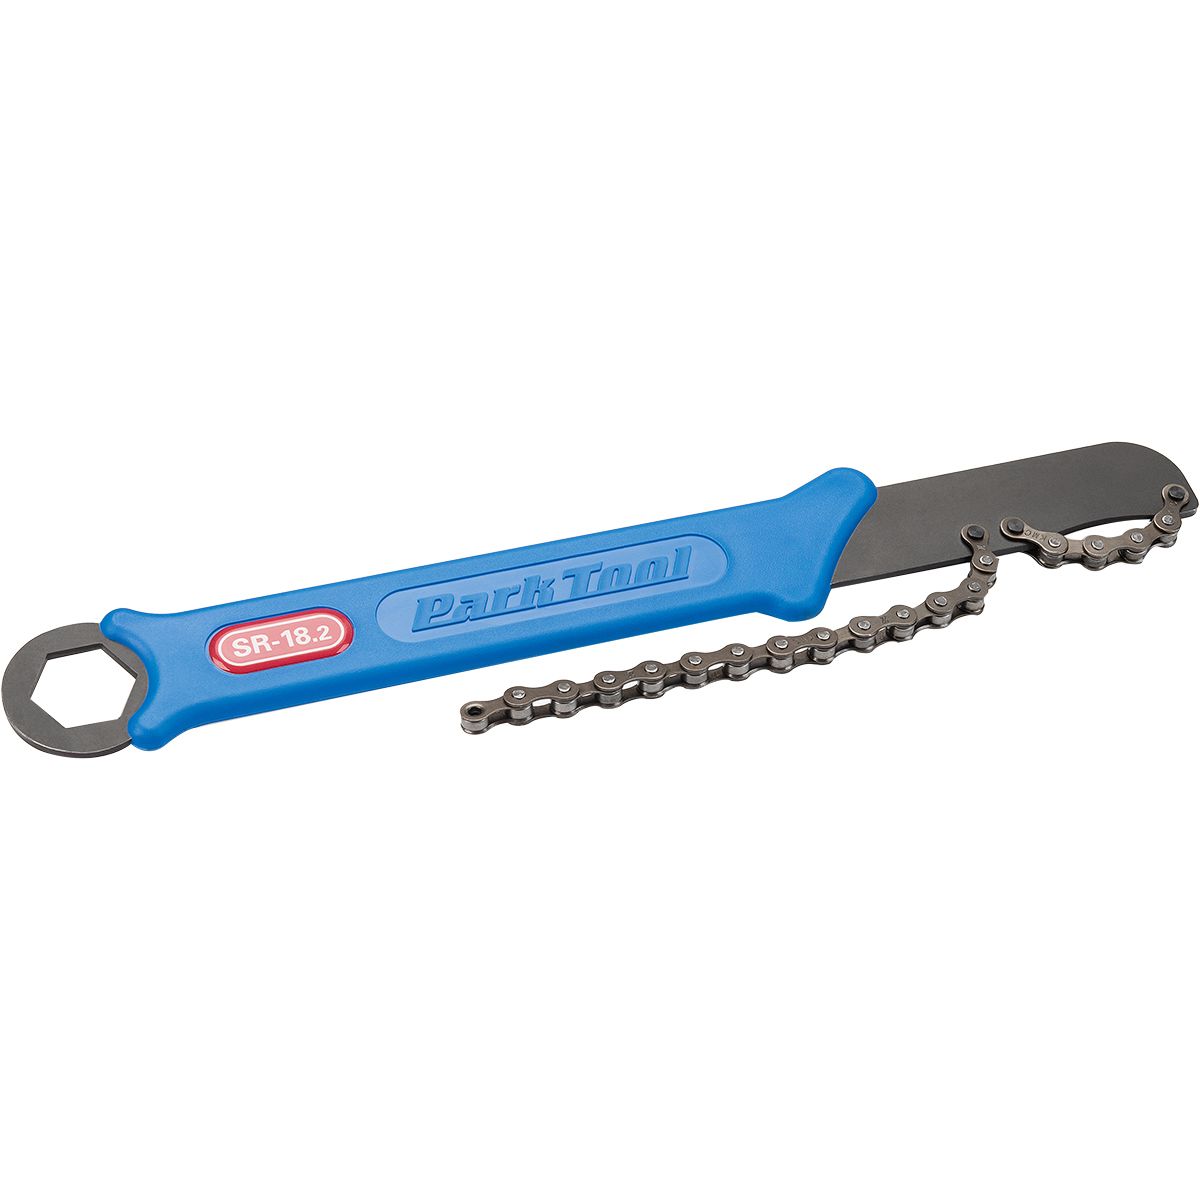 Park Tool SR-18.2 Chain Whip/Sprocket Remover for 1/8in Cogs Blue, One Size